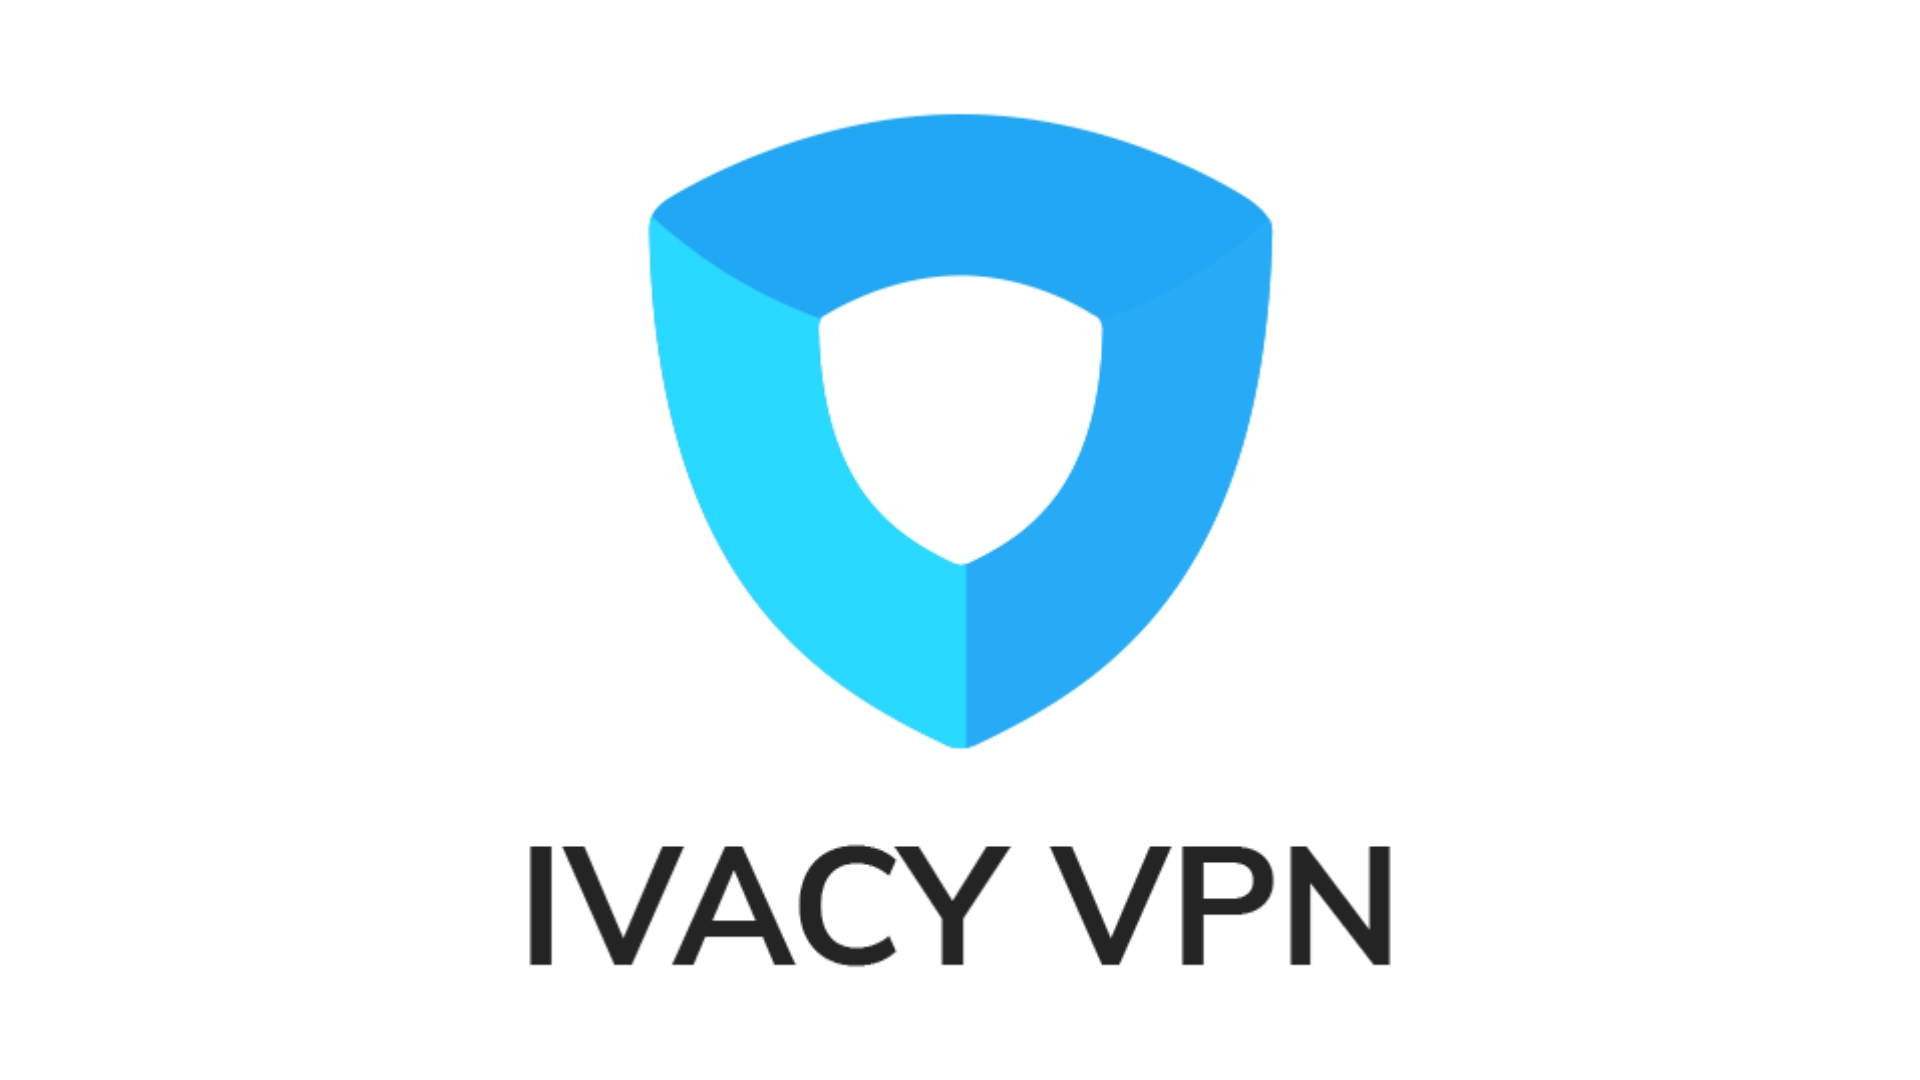 Best VPN - Ivacy VPN, An image shows the Ivacy VPN logo on a white background.